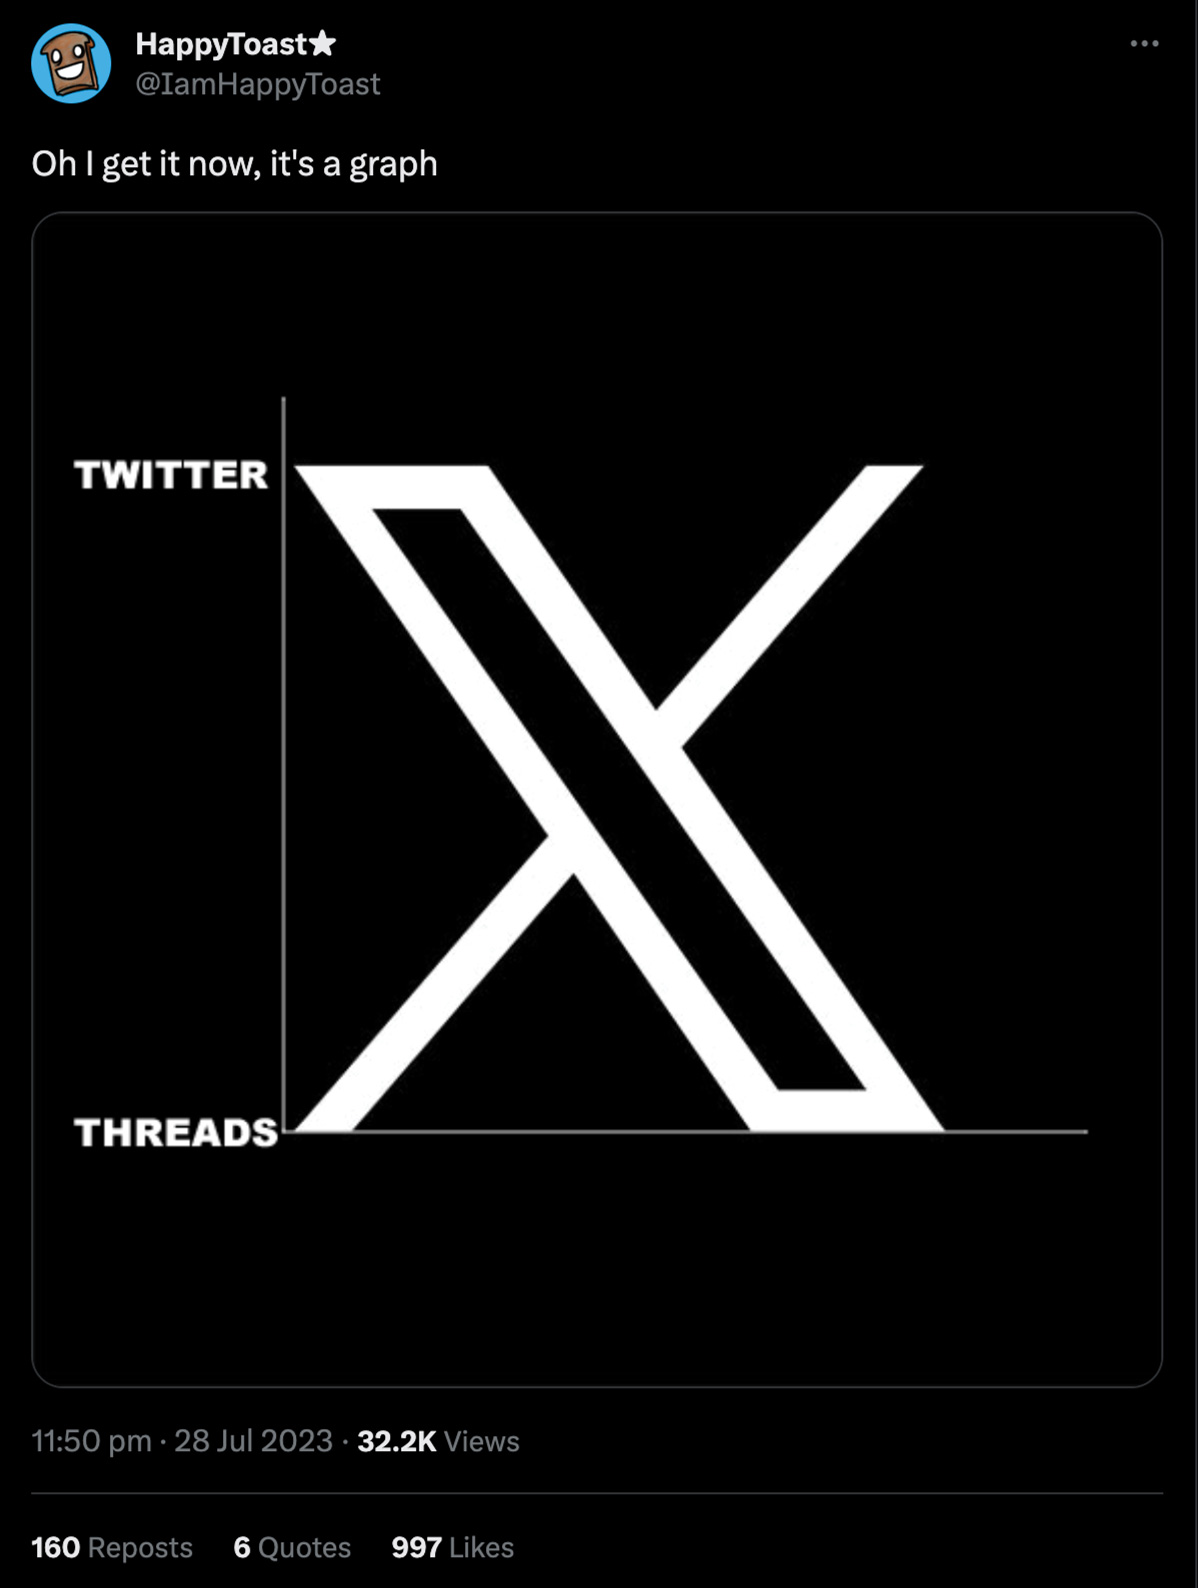 Tweet from @IamHappyToast with the caption 'Oh I get it now, it’s a graph' and an image of the new X logo with 'Twitter' at the top of the y-axis and 'Threads' at the bottom of the y-axis indicating the downwards trajectory of Twitter and the upwards trajectory of Threads